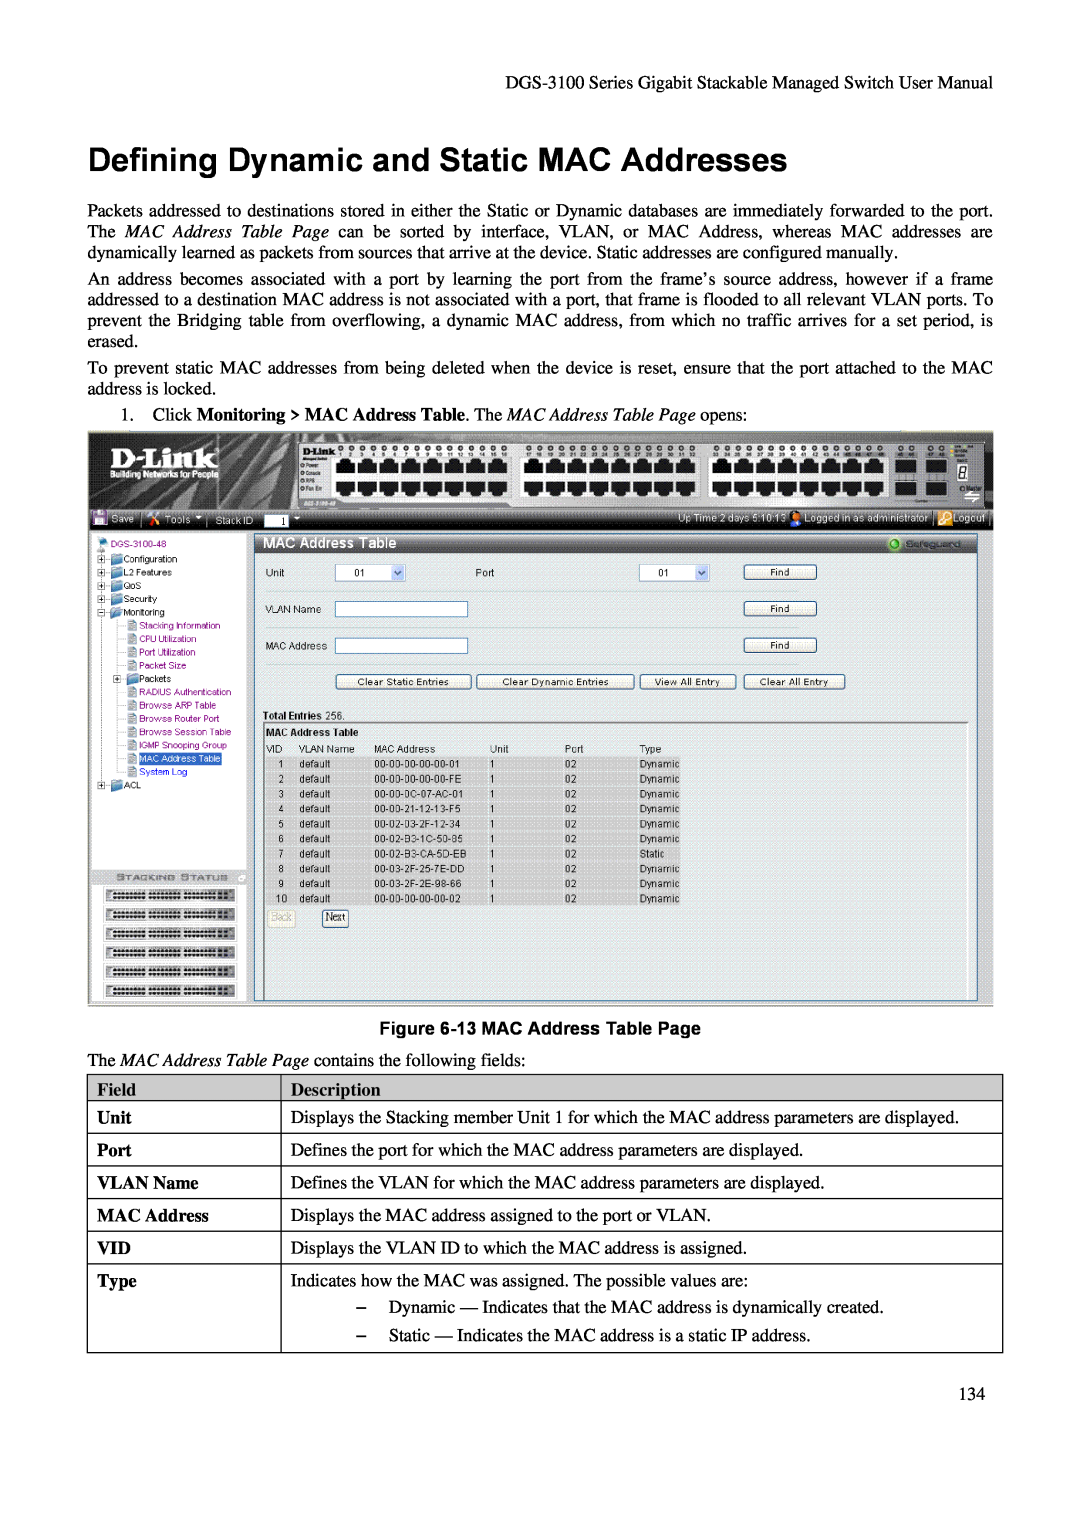 D-Link DGS-3100 user manual Defining Dynamic and Static MAC Addresses, 13 MAC Address Table Page, Description 